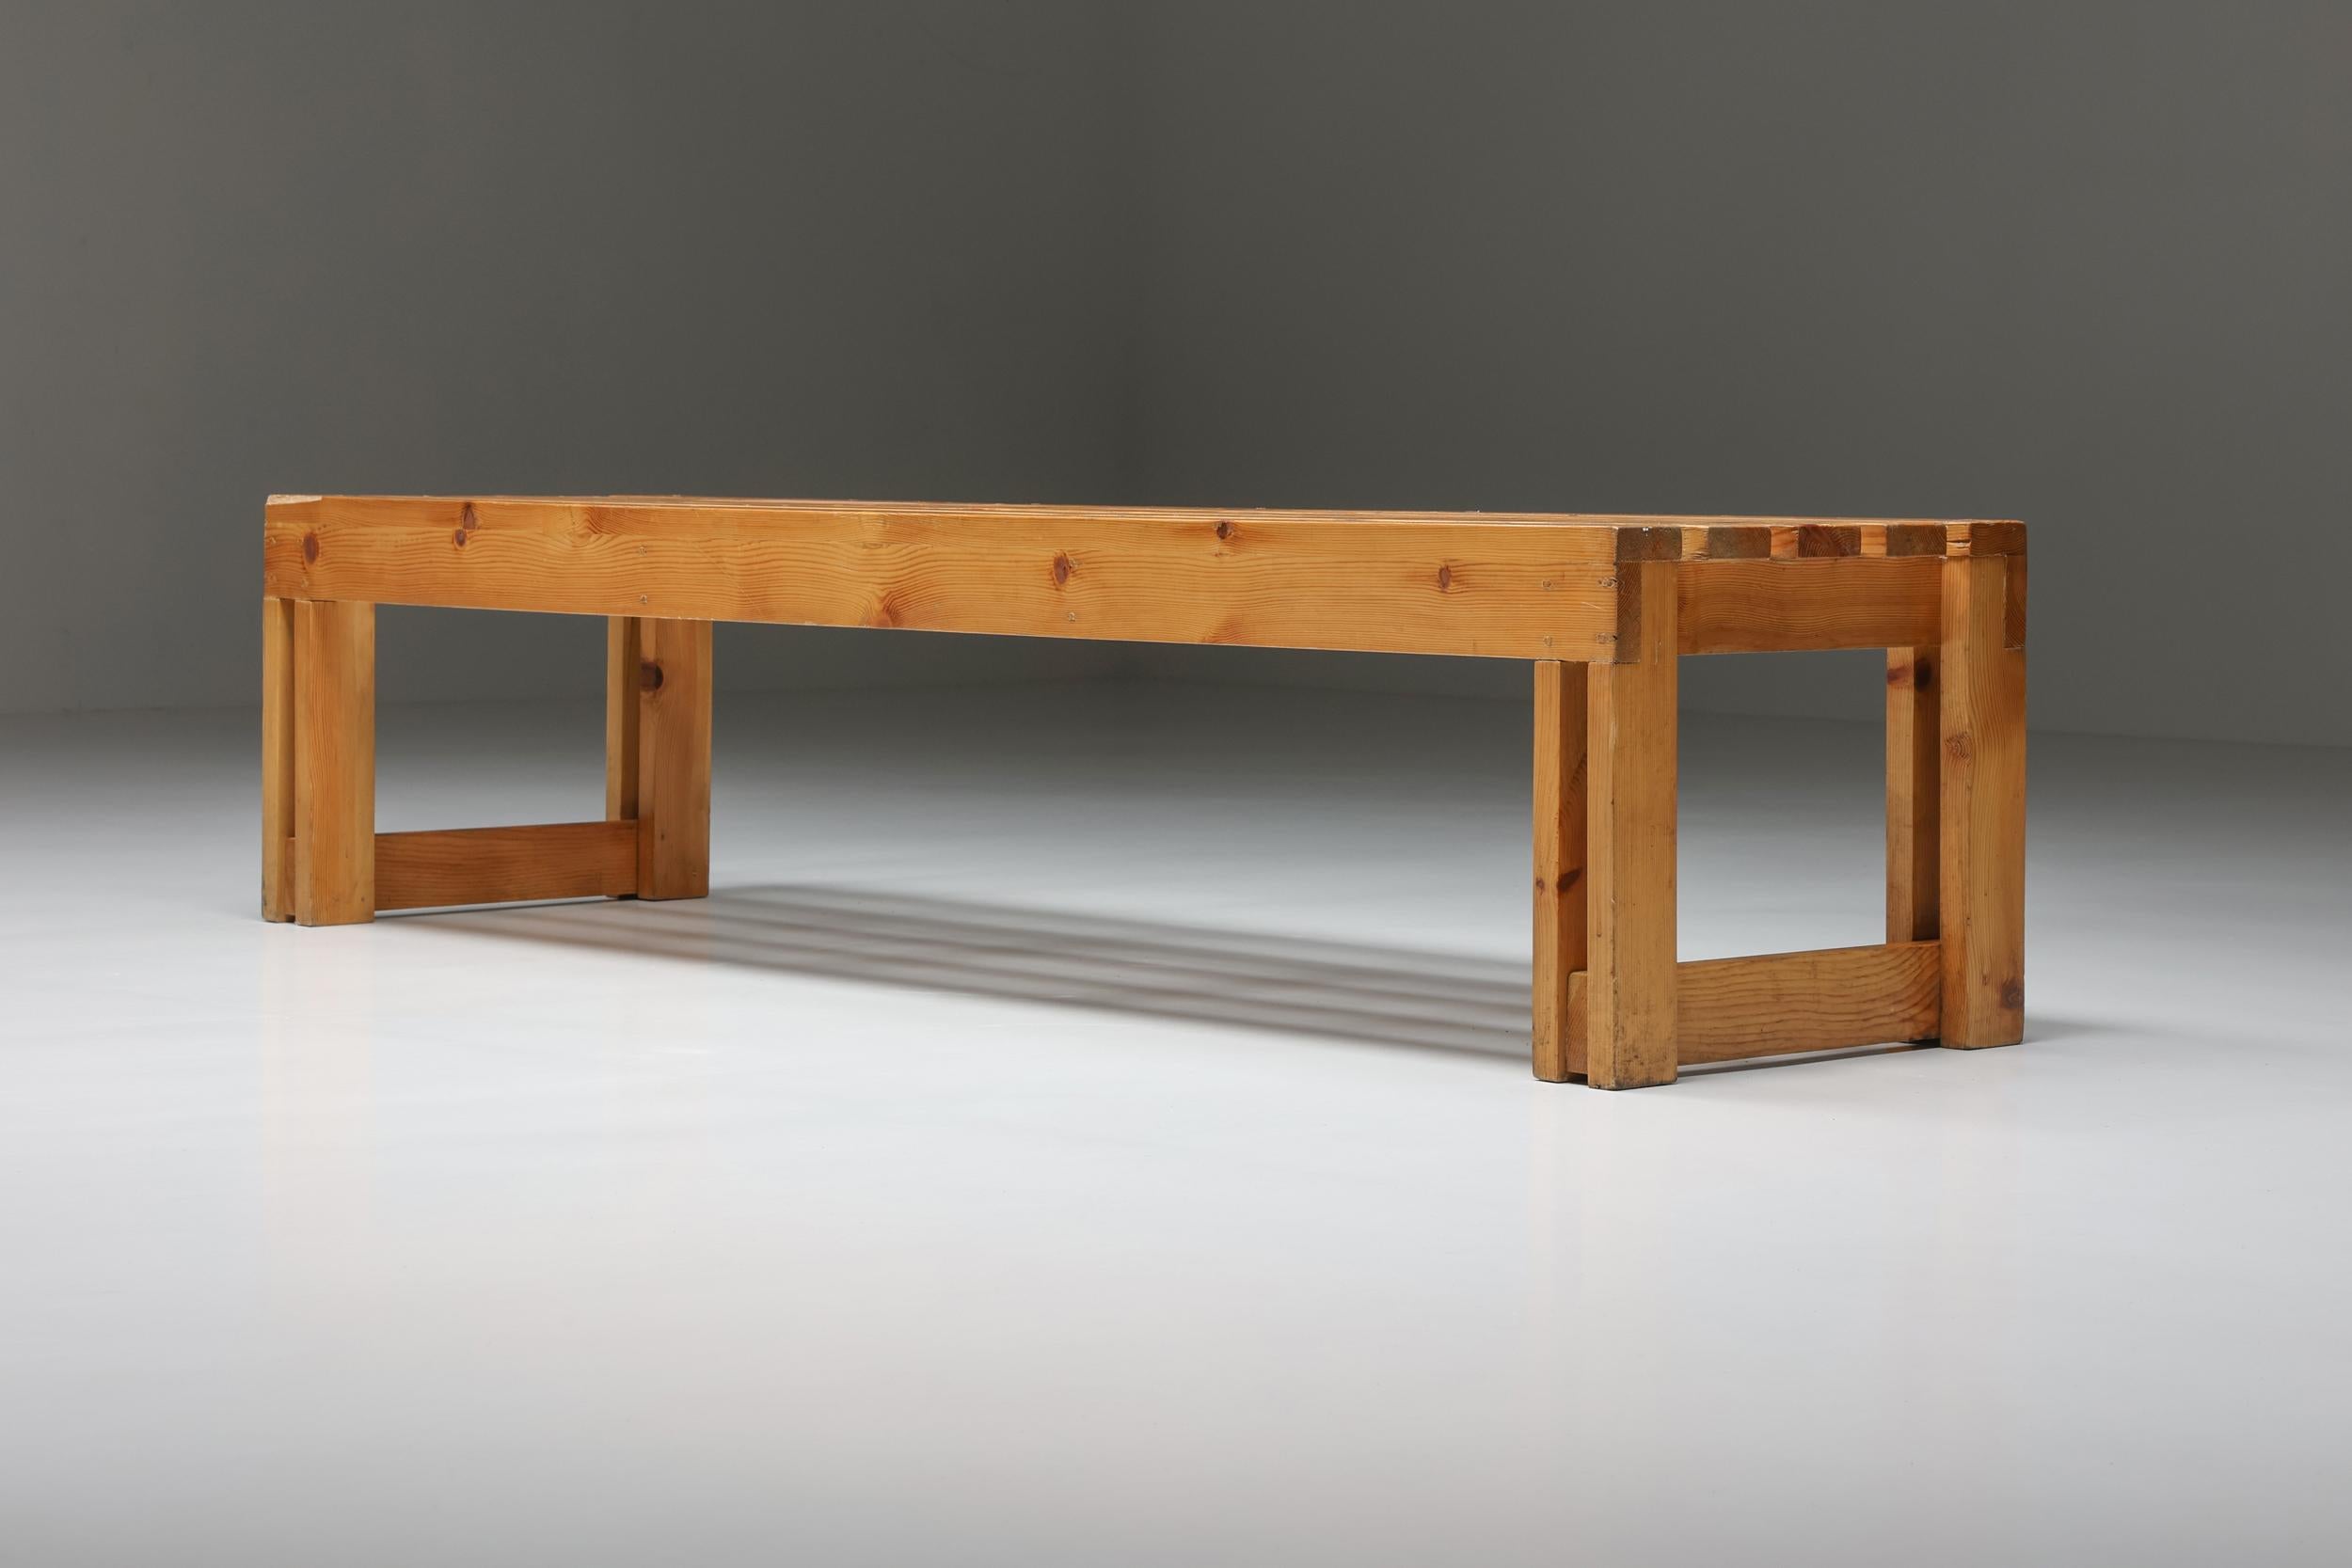 Italian Pine Bench Set from Old Vineyard, Modernist, Italy, 1960's For Sale 1